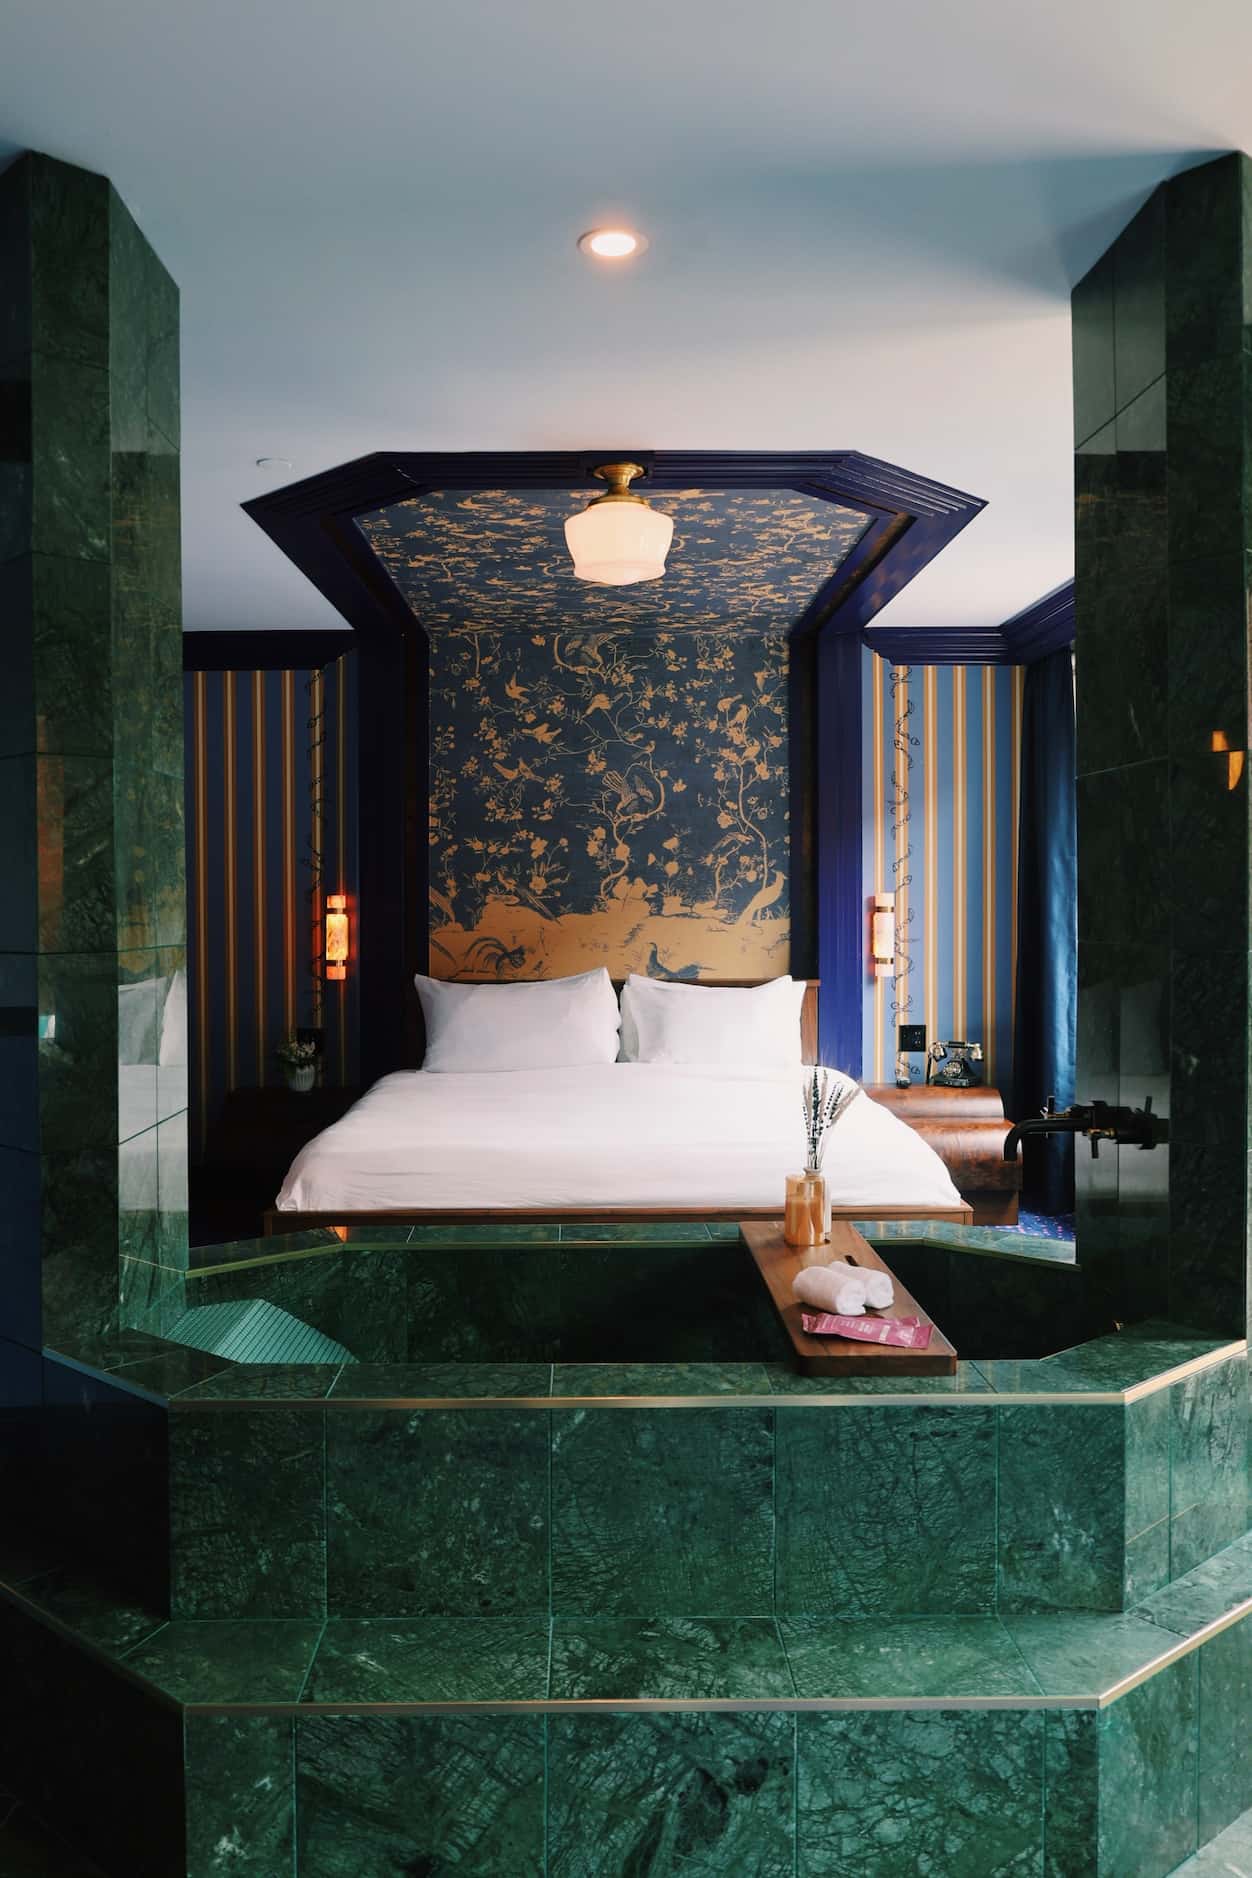 A tub, at the foot of the bed? Hotel Herringbone in Waco is a design-forward inn, in a city...